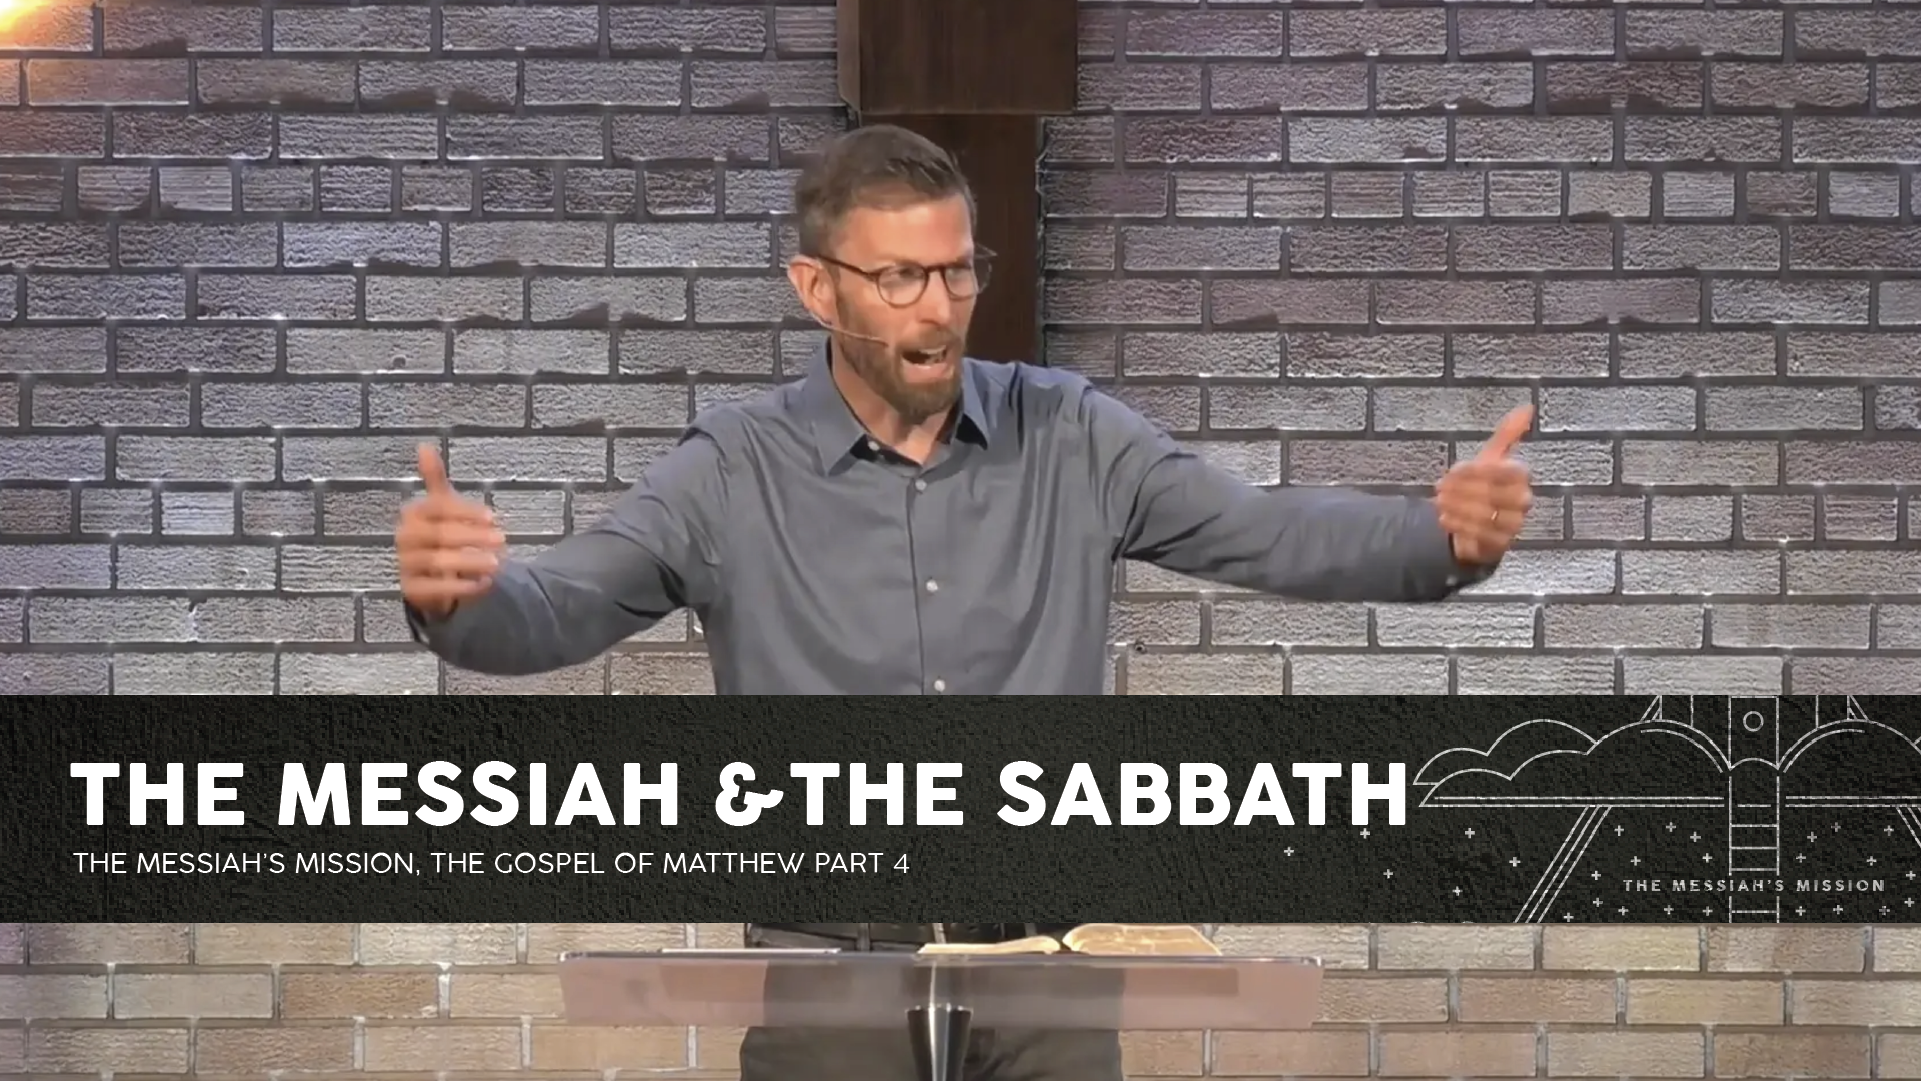 The Messiah and the Sabbath